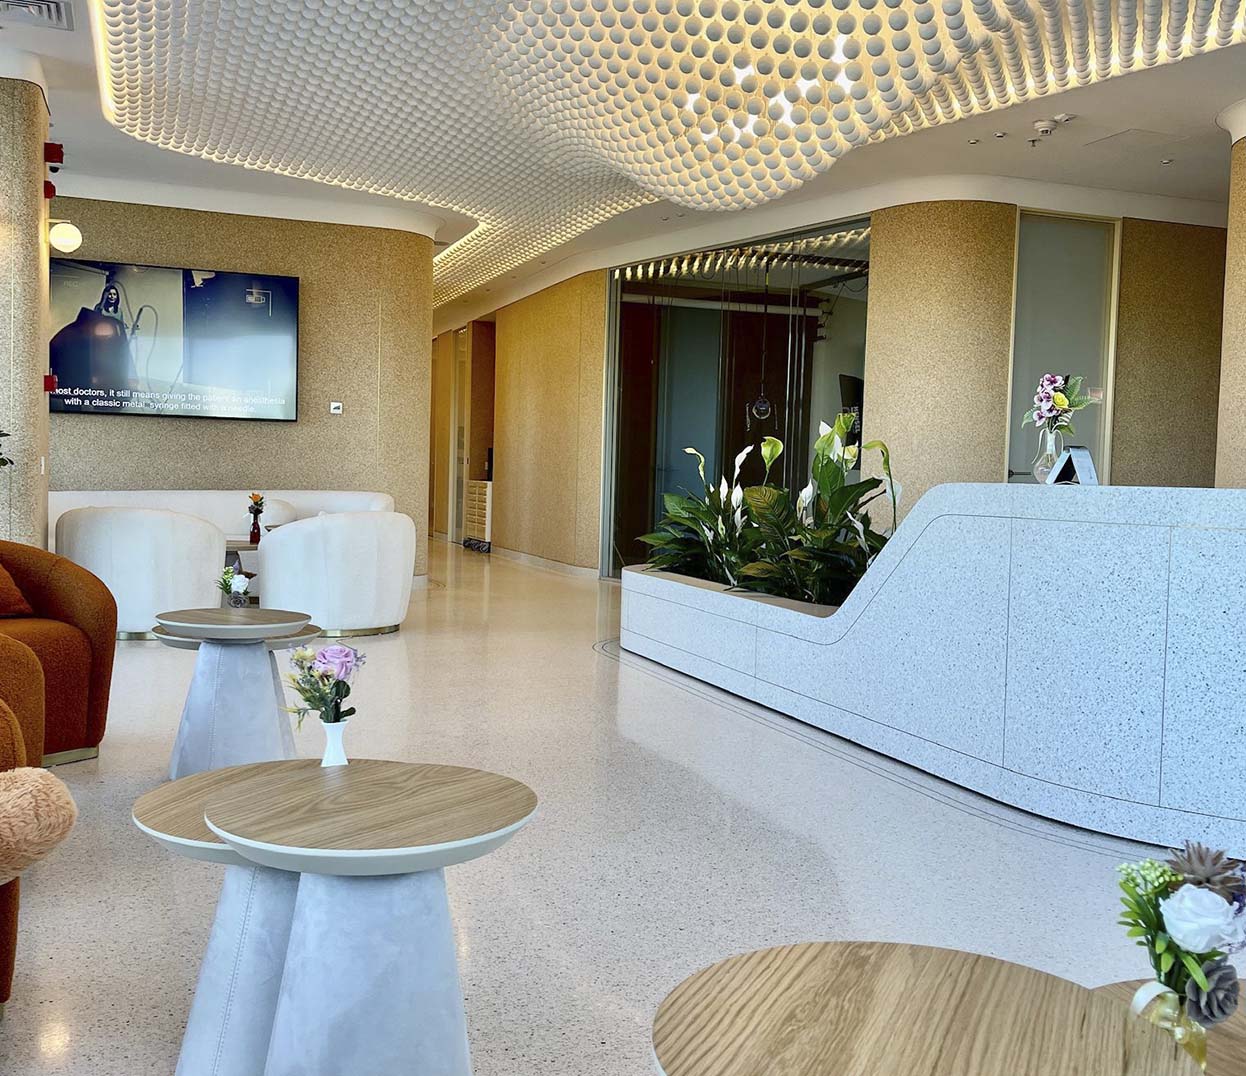 terrazzo flooring at the neoclique nord dental care